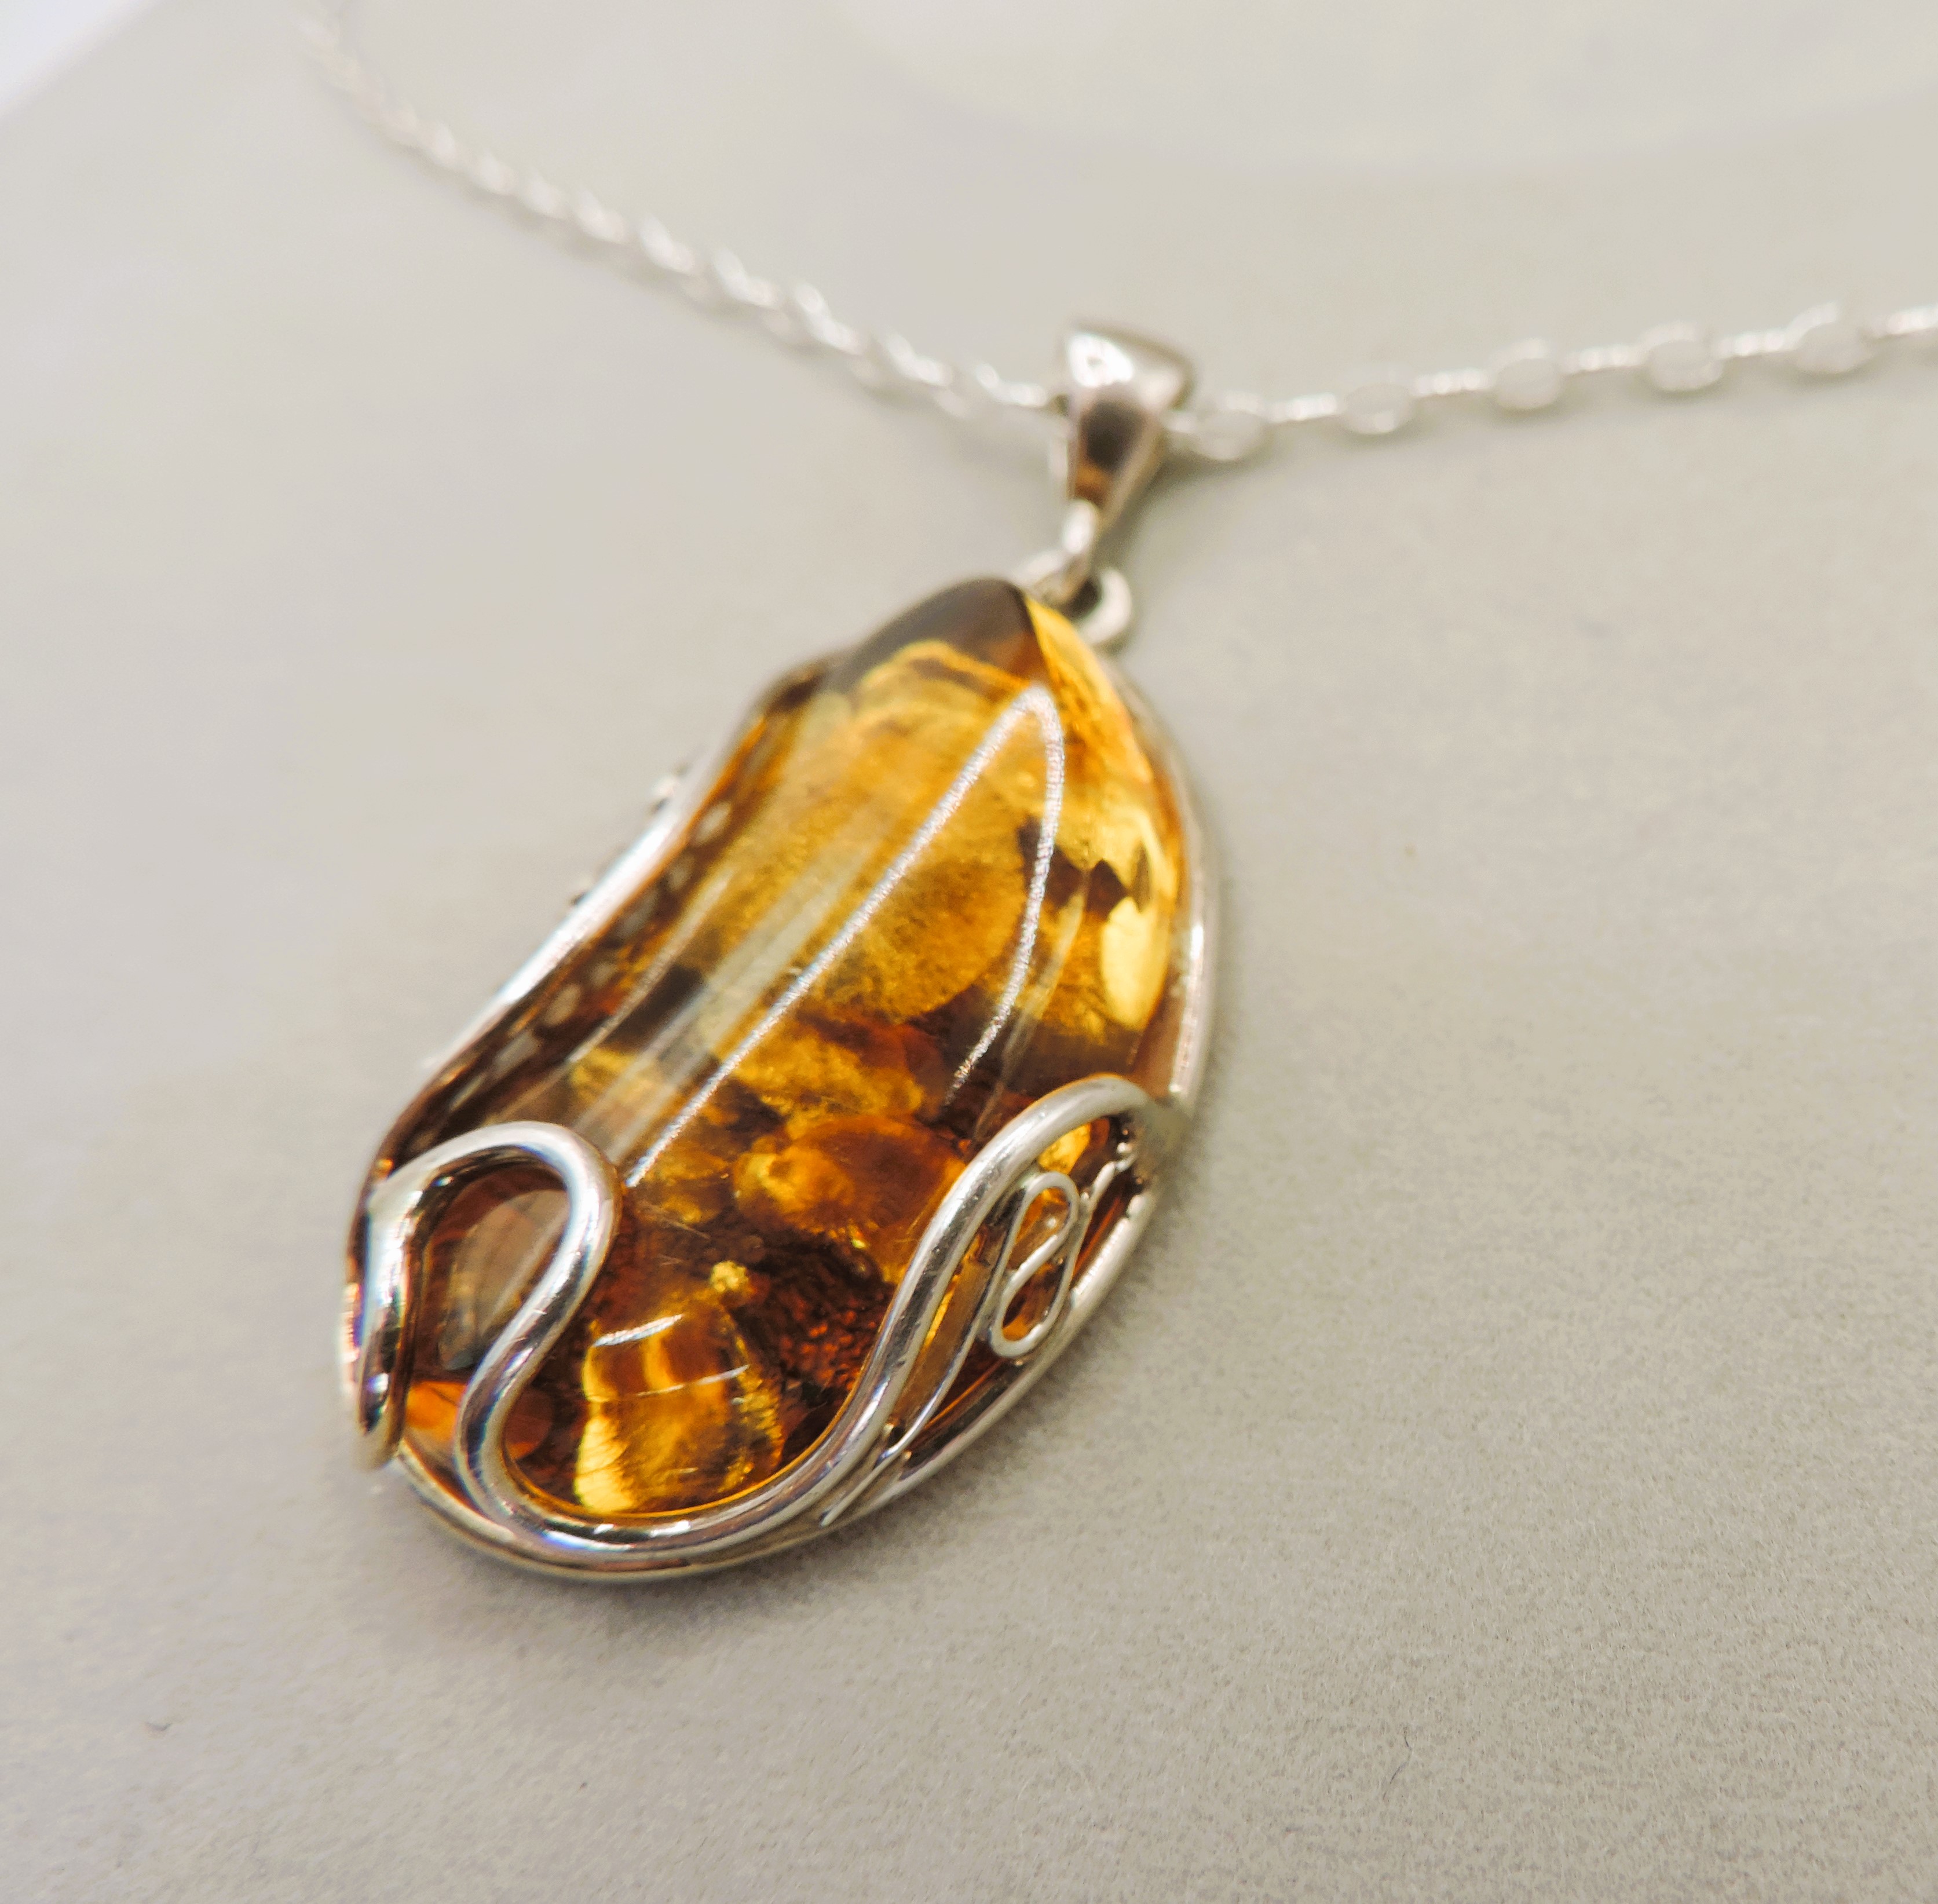 Artisan Sterling Silver Amber Pendant Necklace With Gift Box - Image 3 of 4